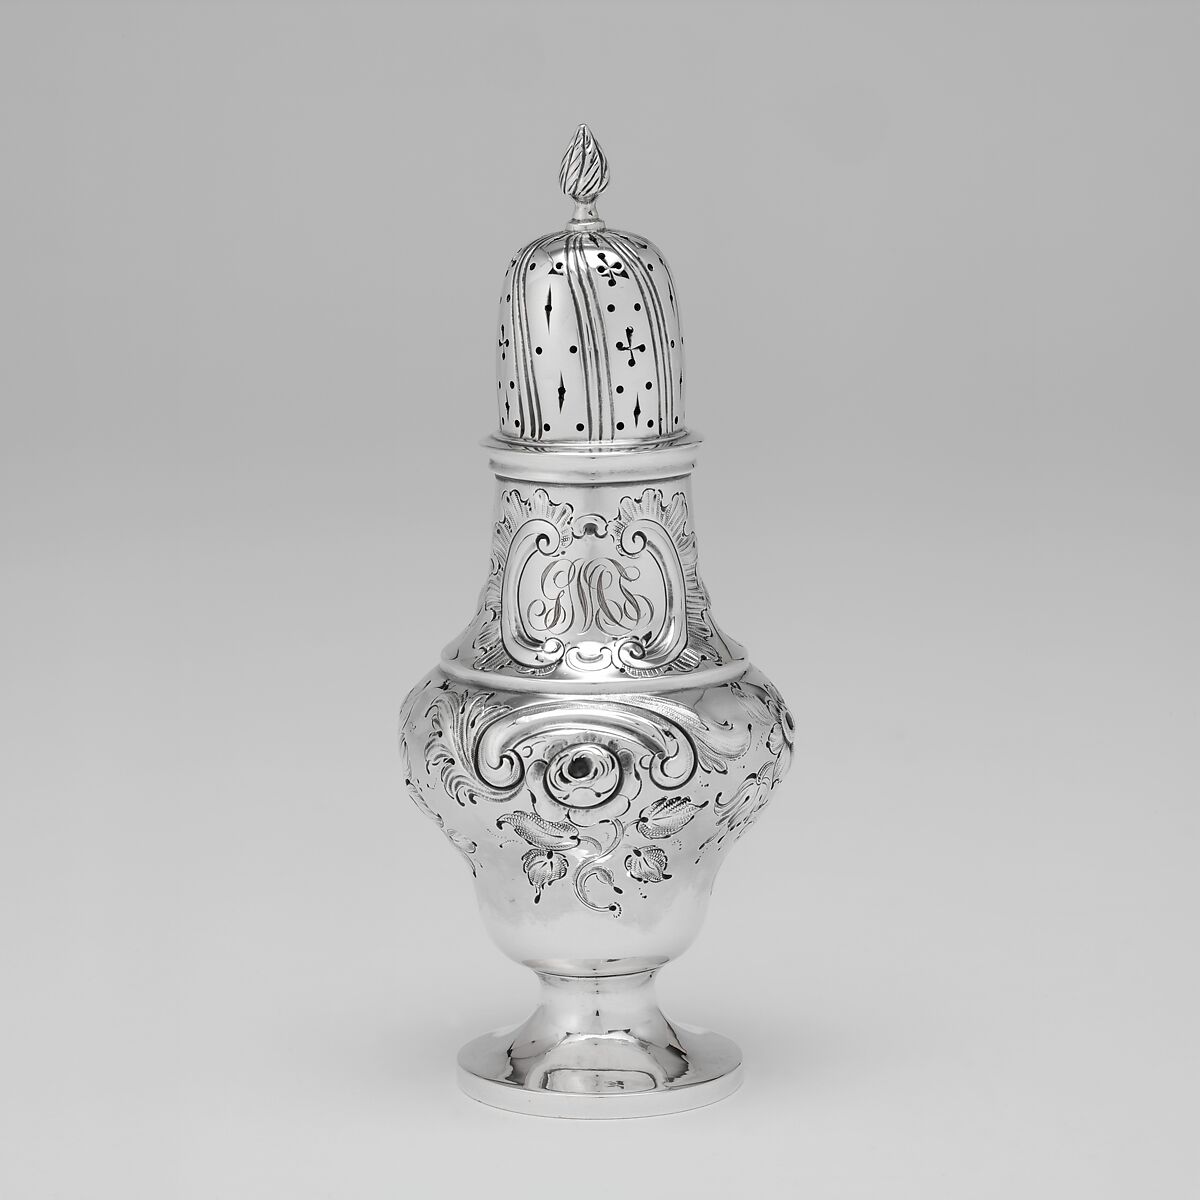 Caster, William Forbes (baptized 1799, active New York, 1826–63), Silver, American 